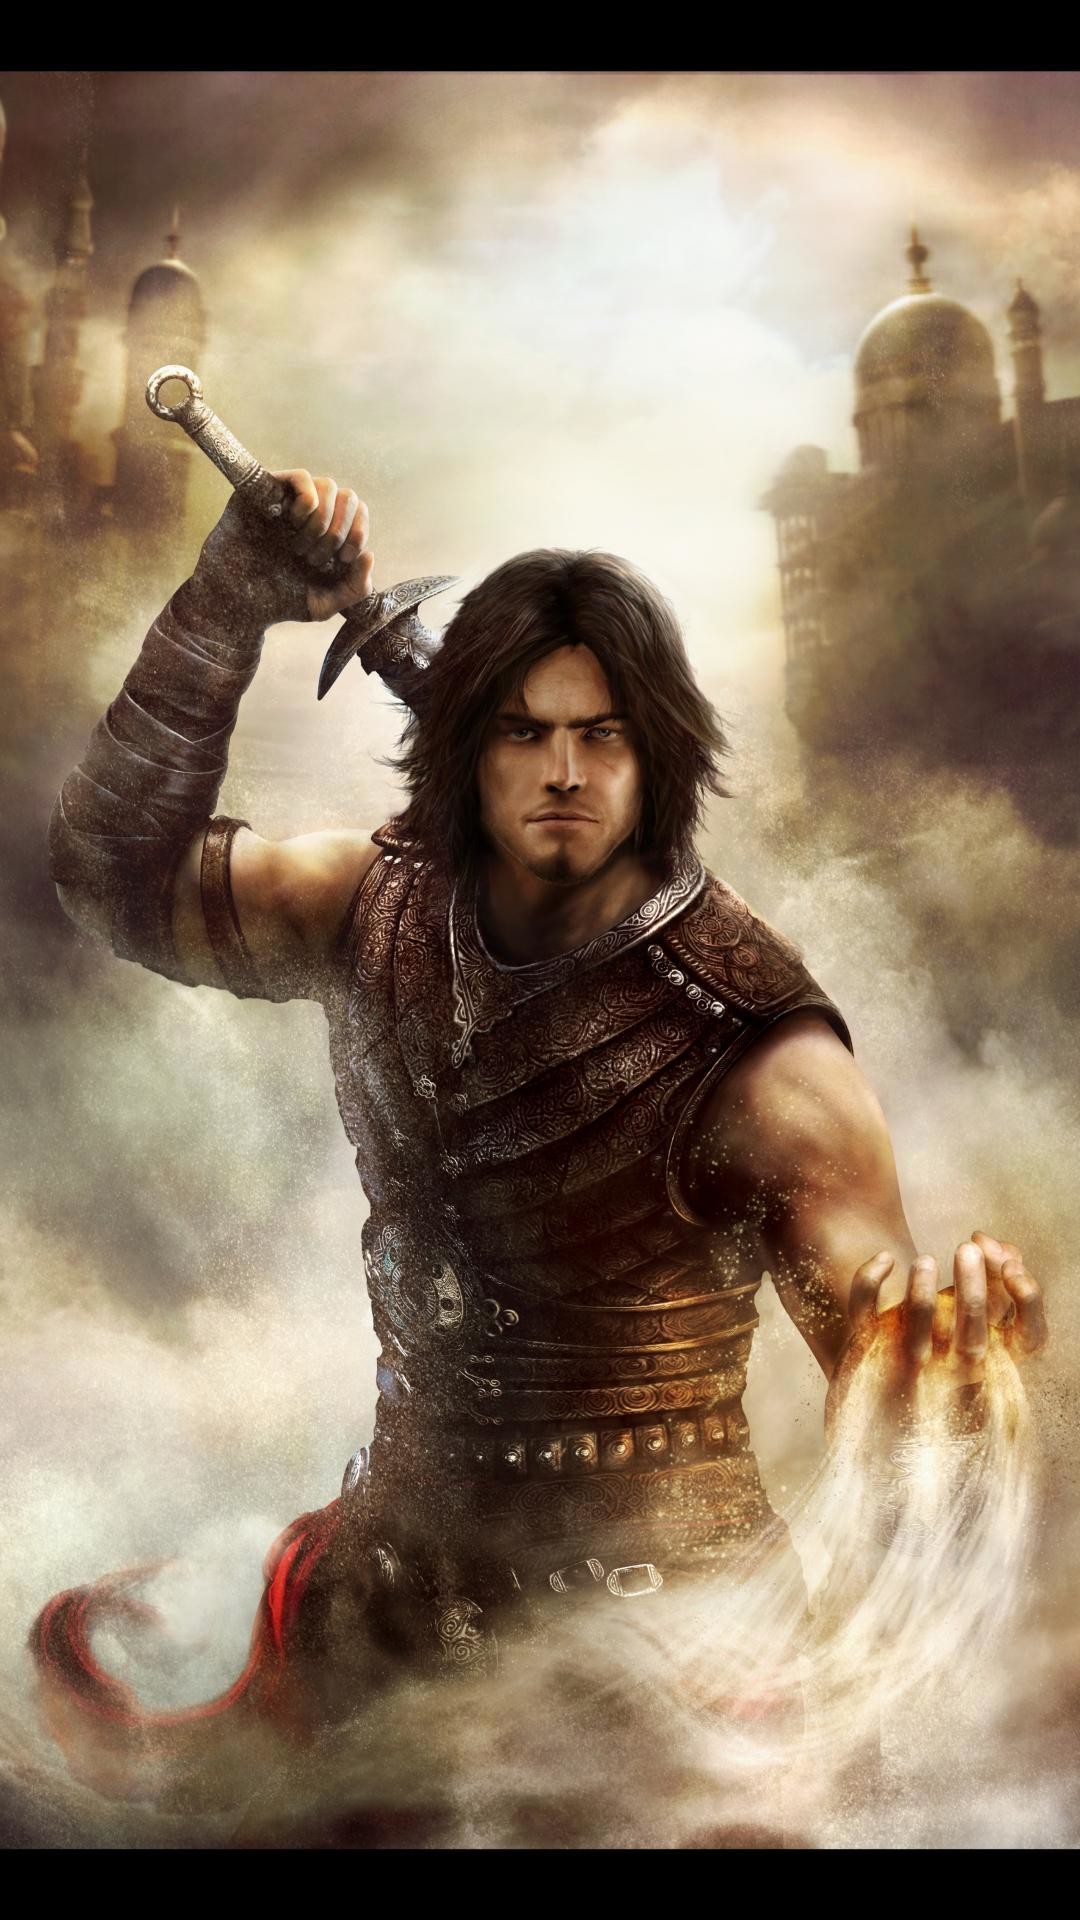 Android wallpaper hd Prince of Persia wallpaper mobile 4